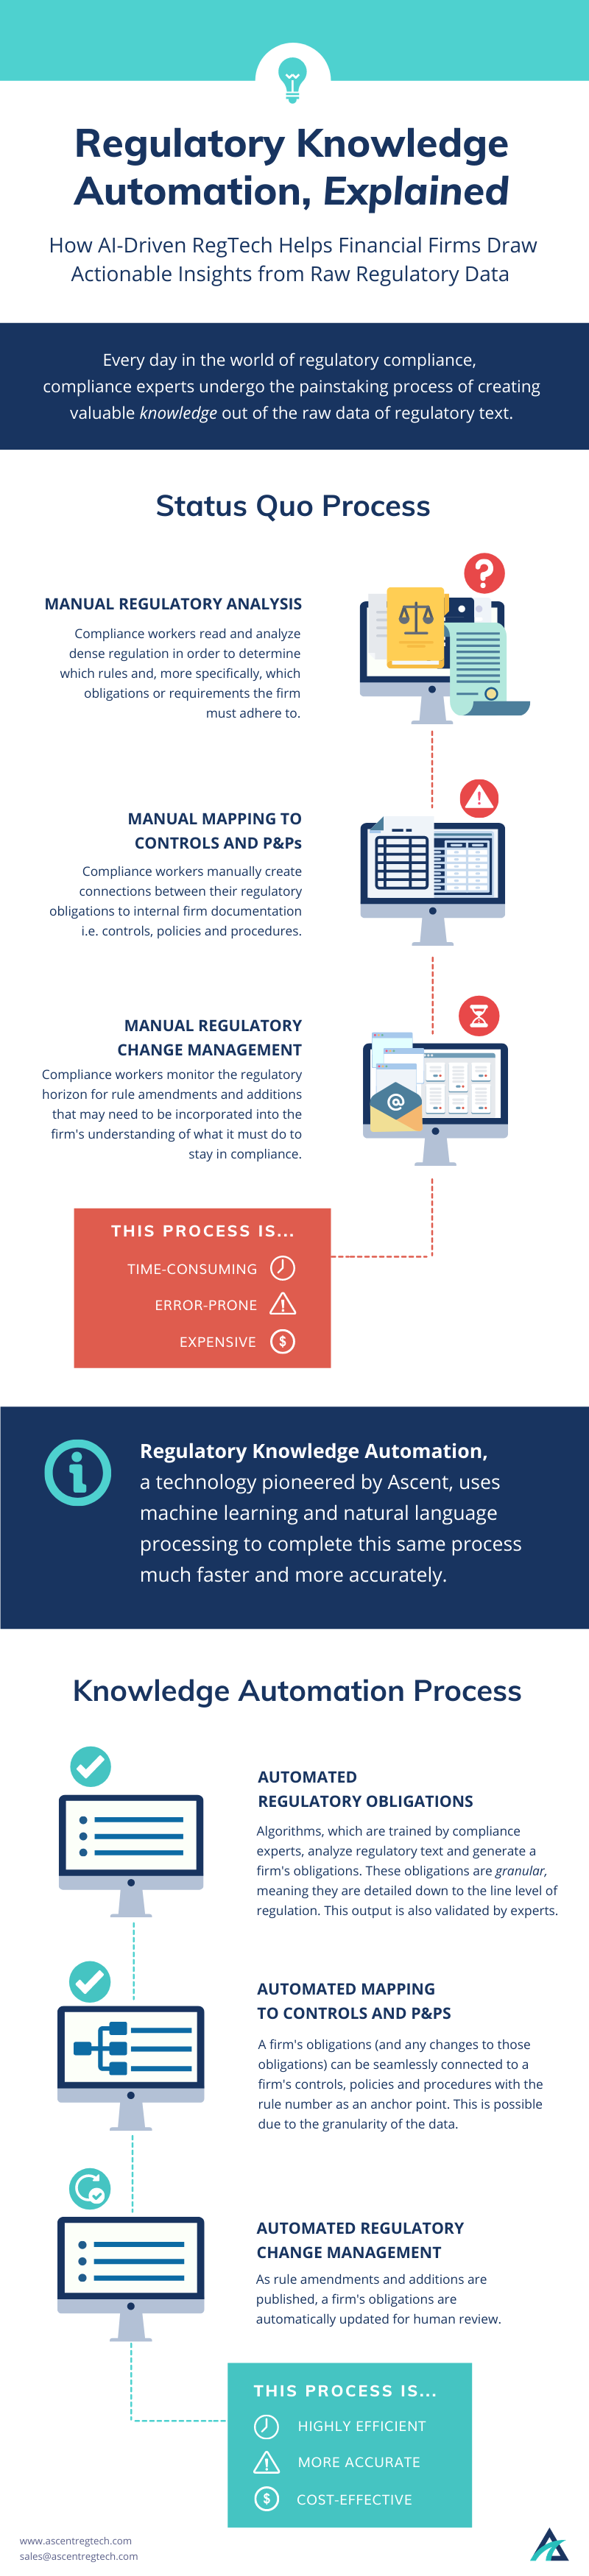 Infographic that explains Regulatory Knowledge Automation